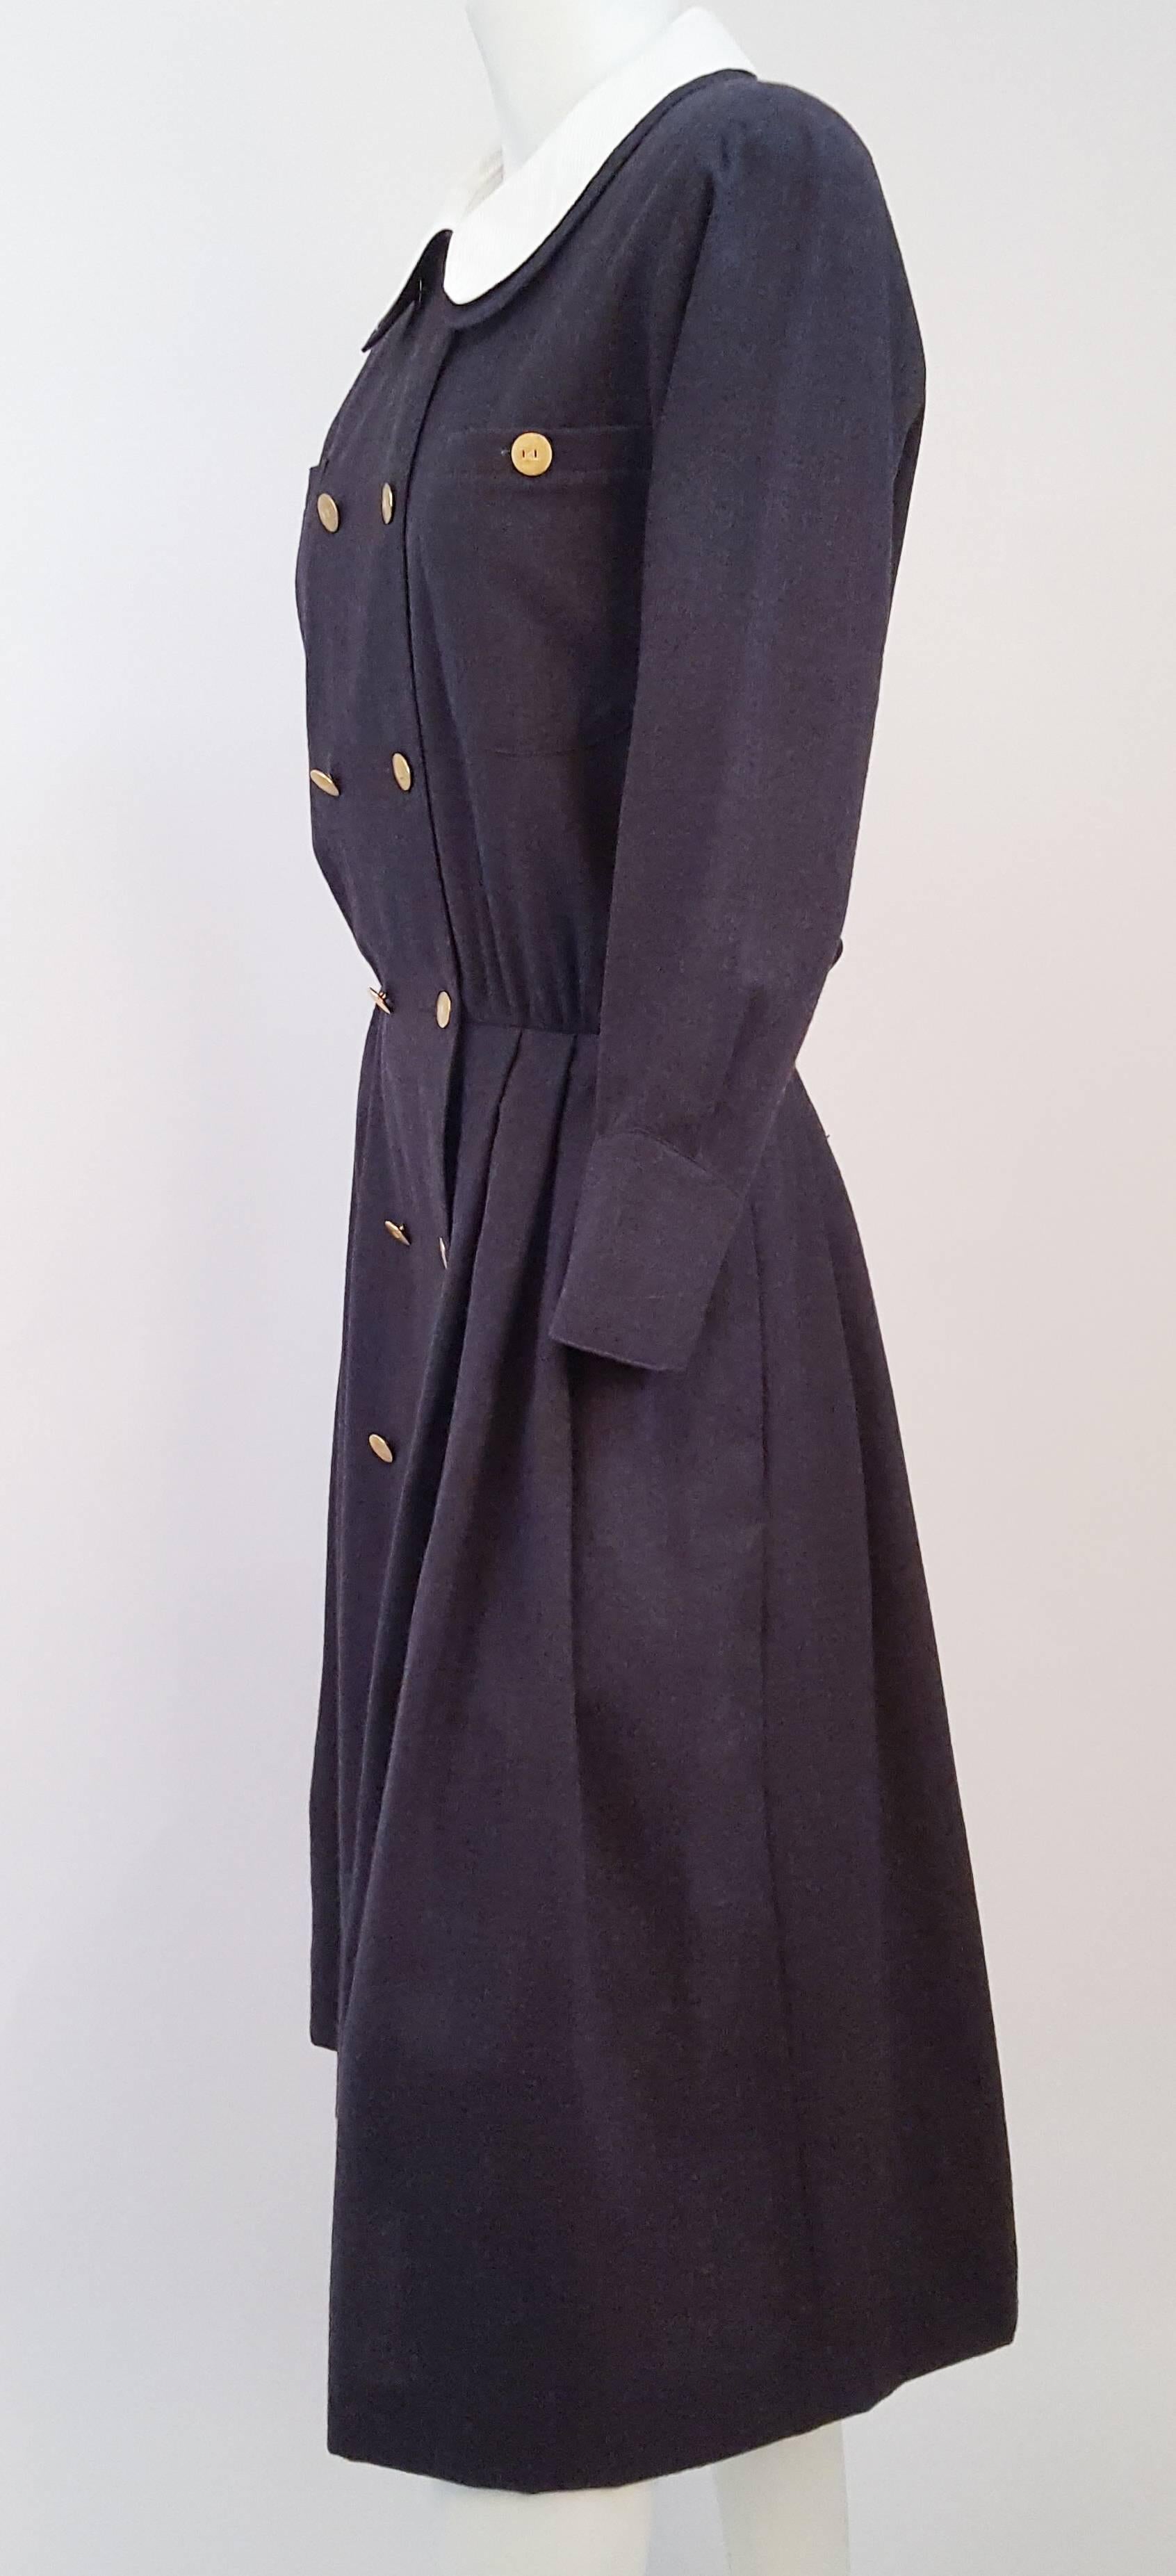 90s Karl Lagerfeld Double Breasted Wool Dress. Removable white collar. Gold KL buttons adorn front of dress. 